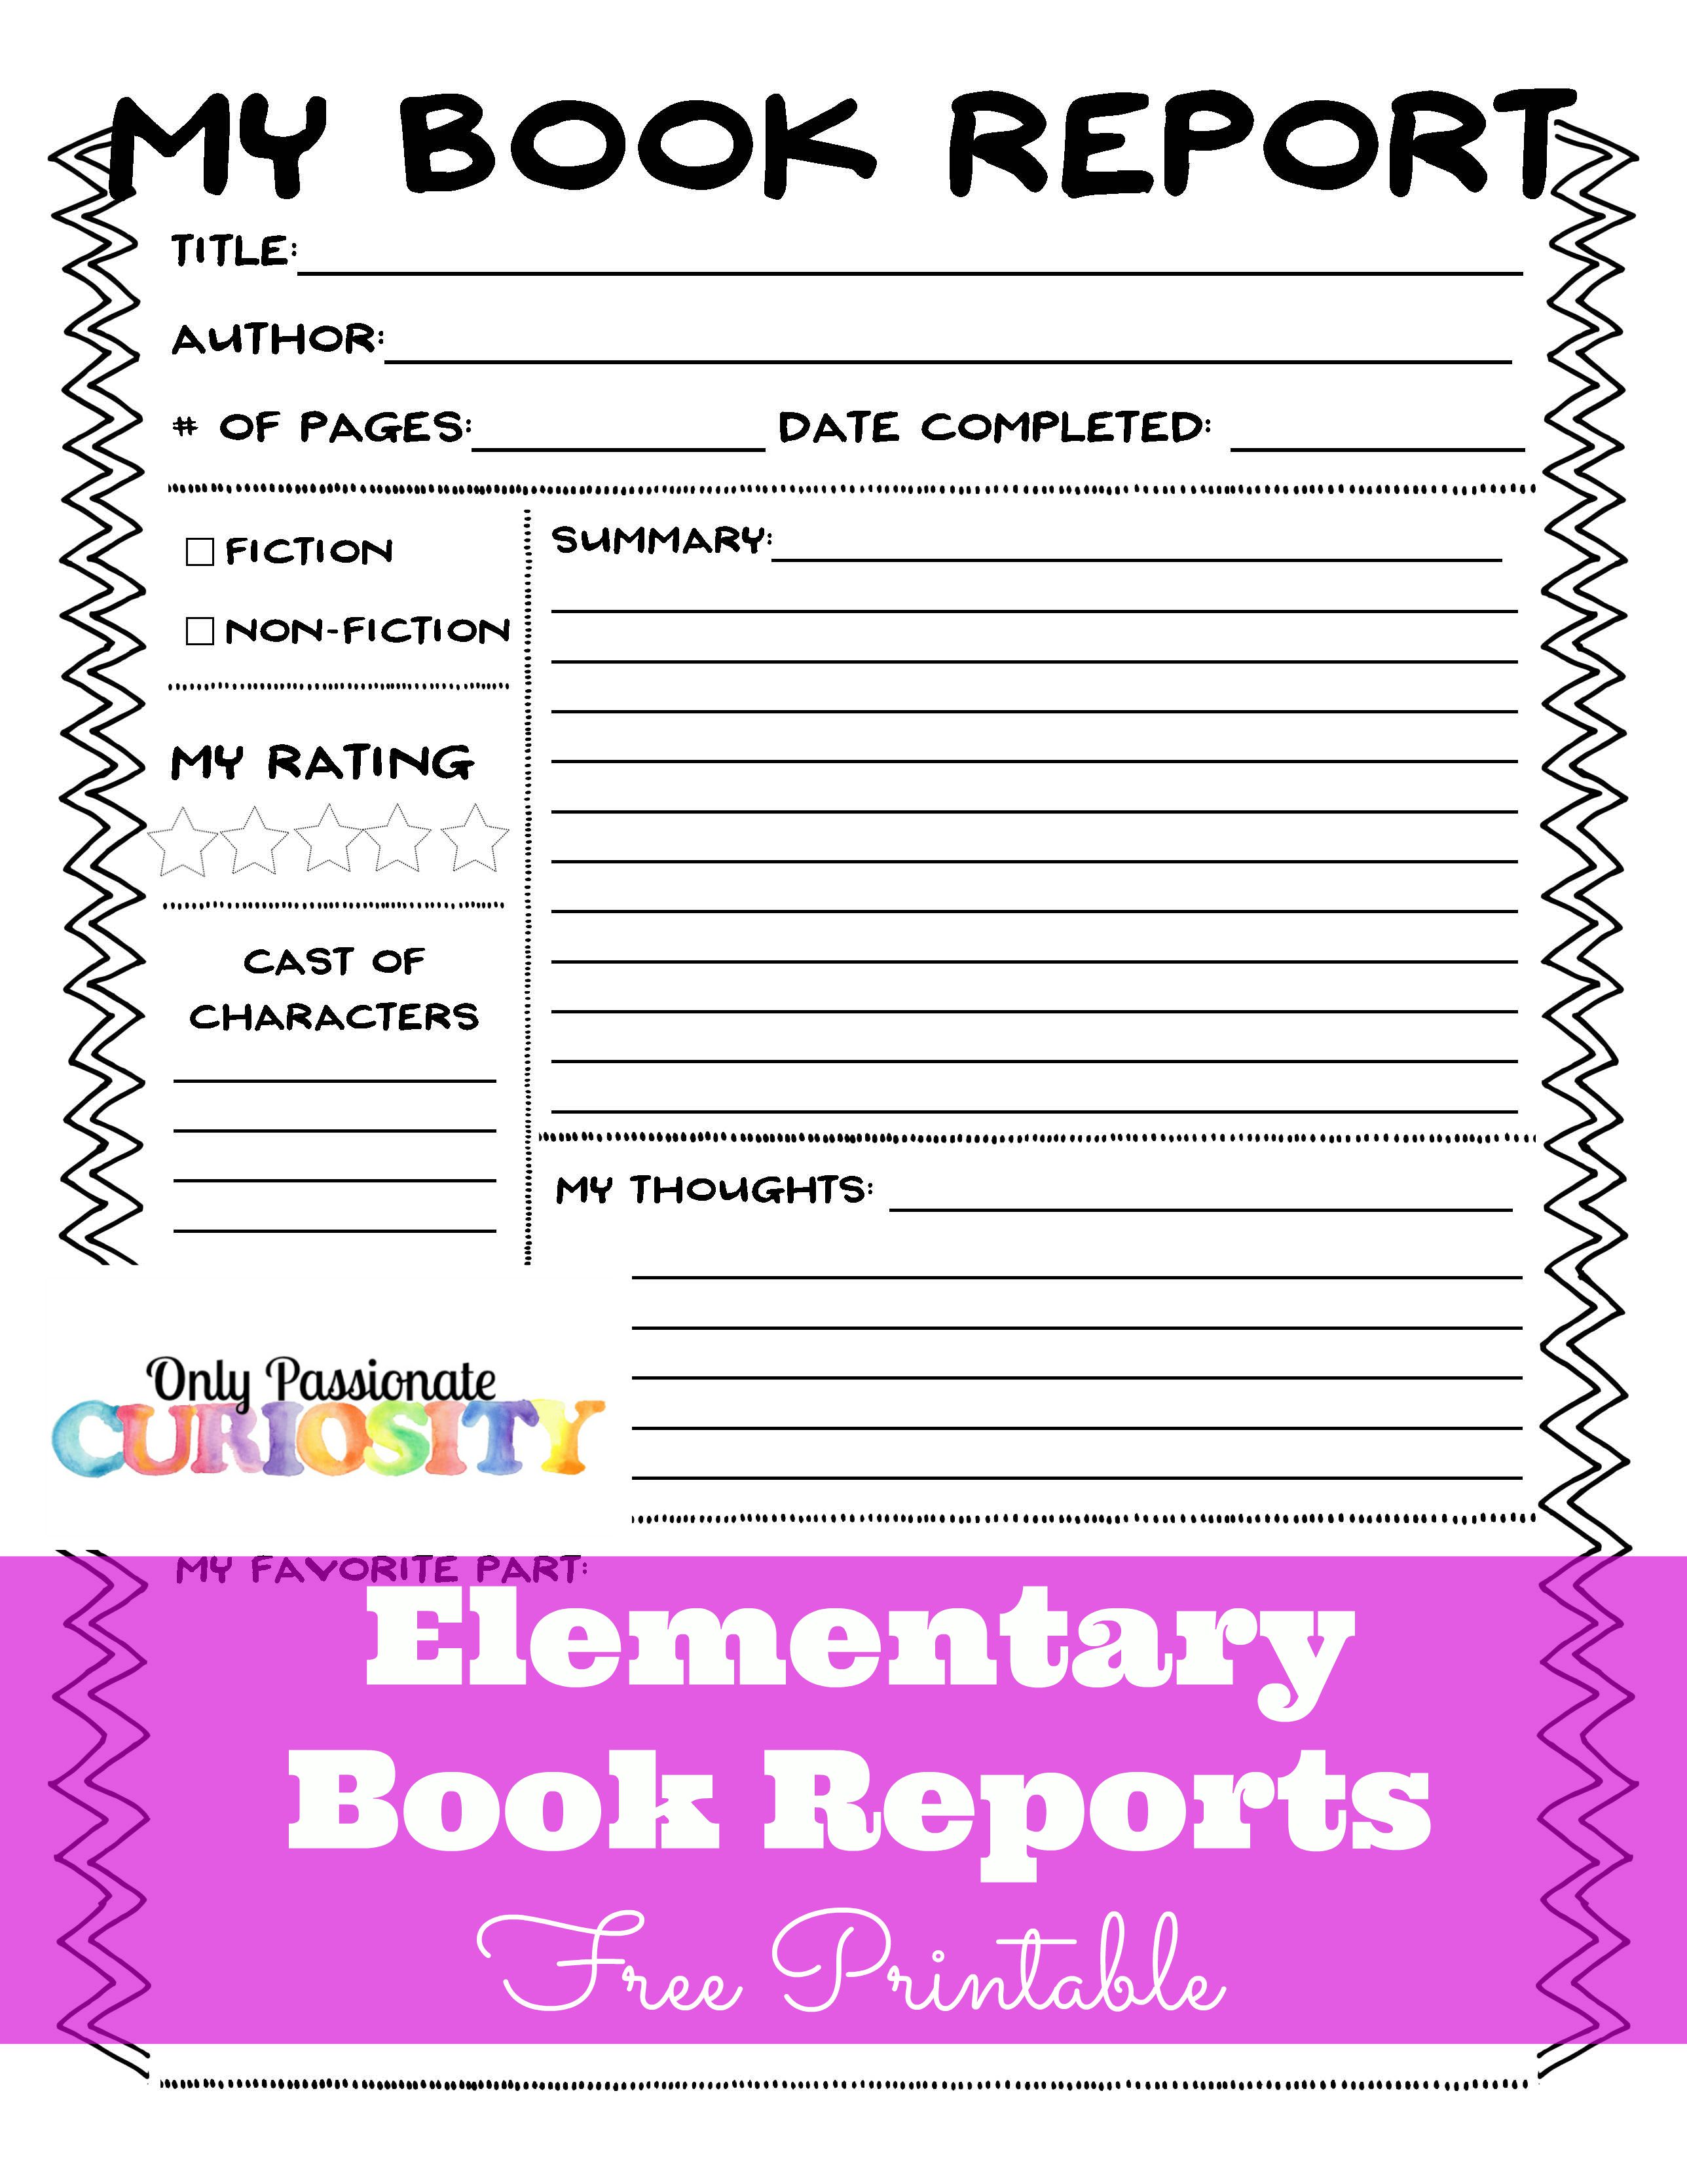 Template For Book Report from store.onlypassionatecuriosity.com